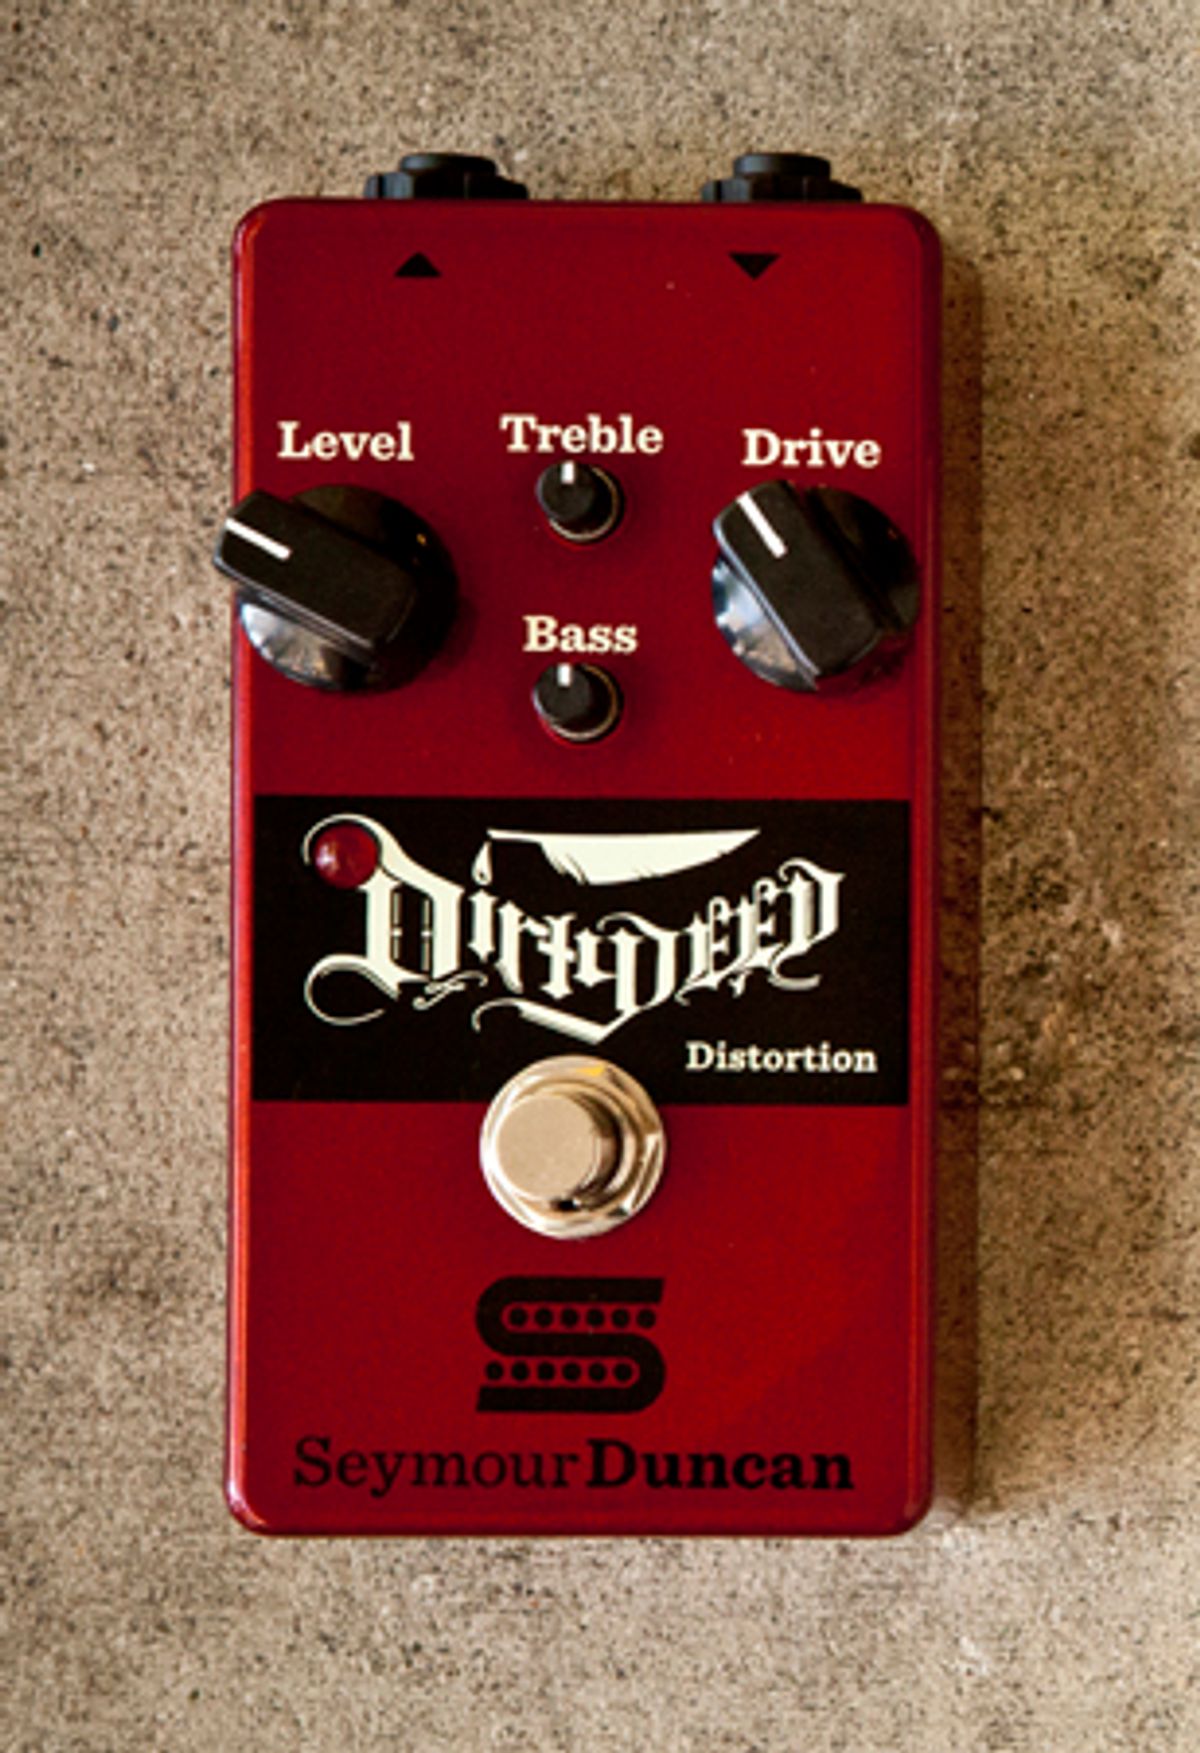 Seymour Duncan Announces the Dirty Deed Distortion Pedal